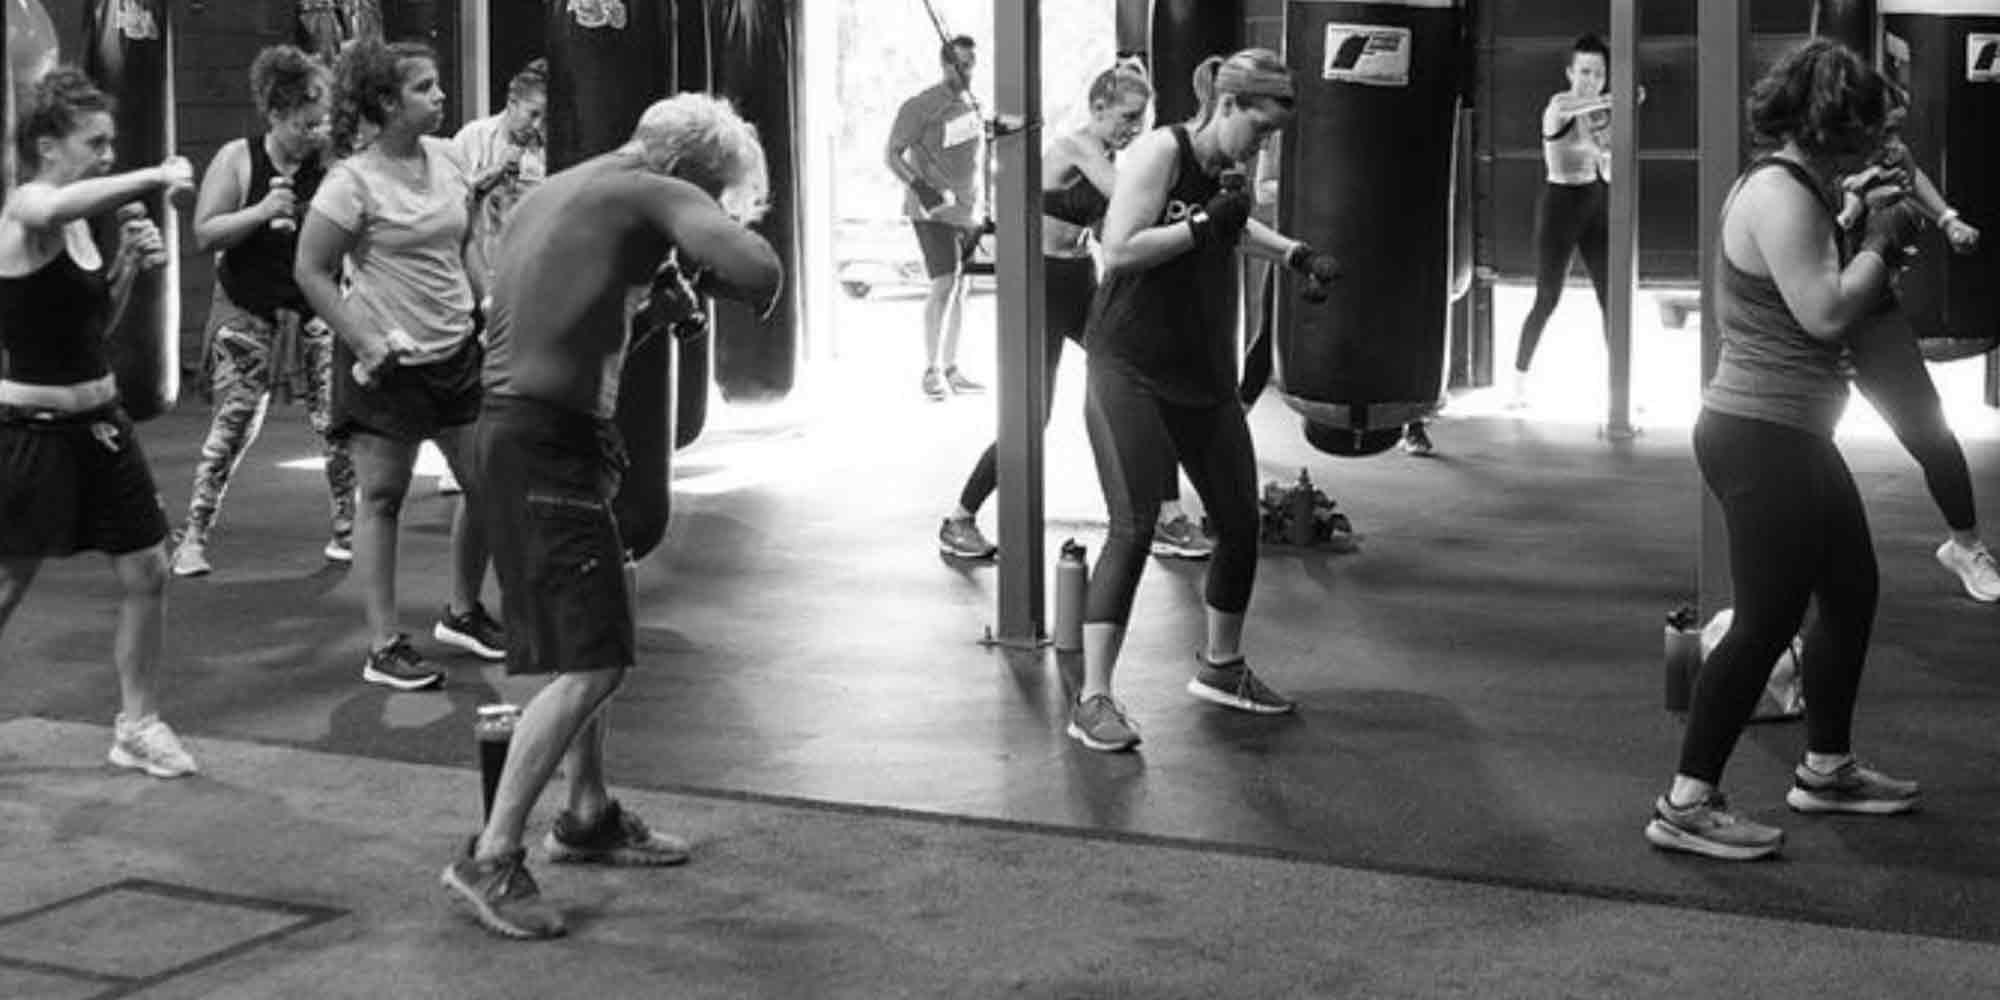 Elite boxing and fitness gym in Columbia, MD offers fitness and self-defense classes for boxing, personal training, cardio fitness, weight loss and morning group fitness classes. Find fitness classes for kids in Columbia, Ellicott City, Howard County, Baltimore City, and Baltimore County, MD.